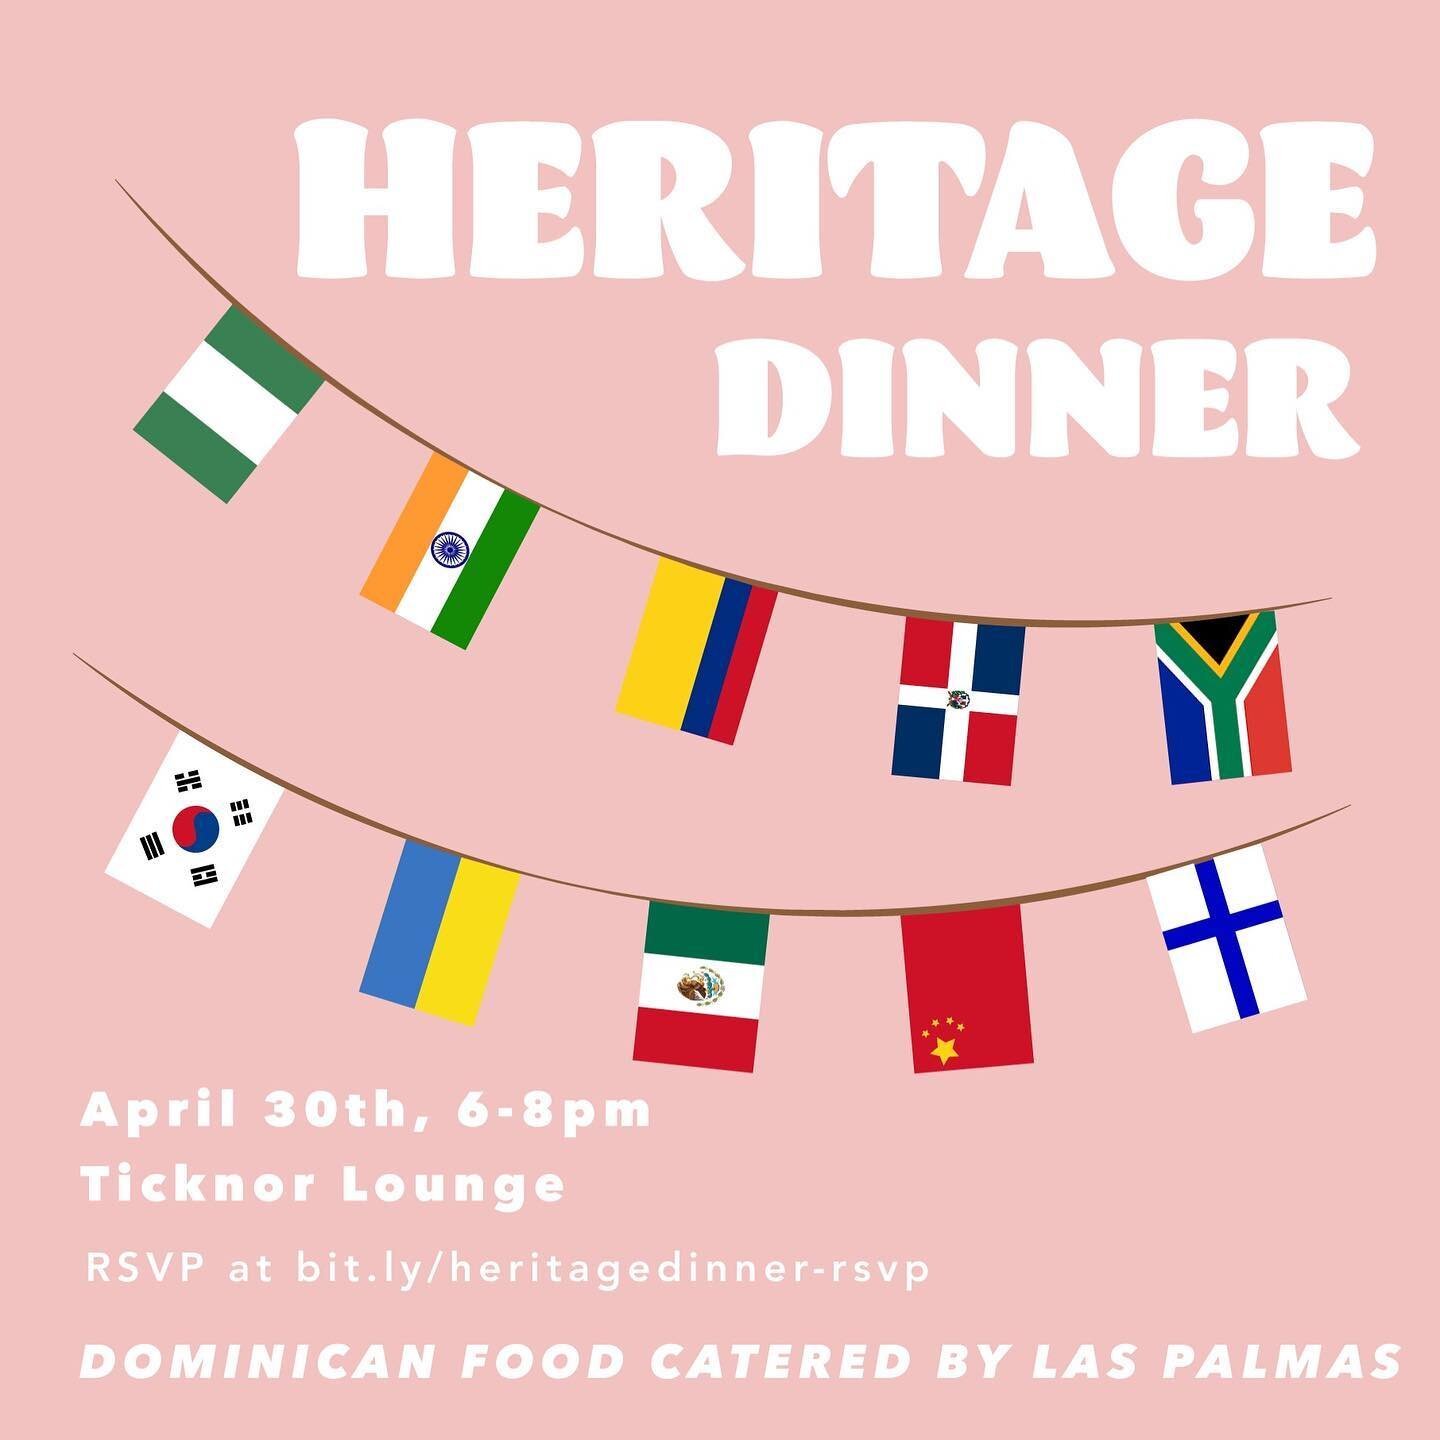 Heritage dinner this Saturday! Come get catered food and celebrate your heritage!!